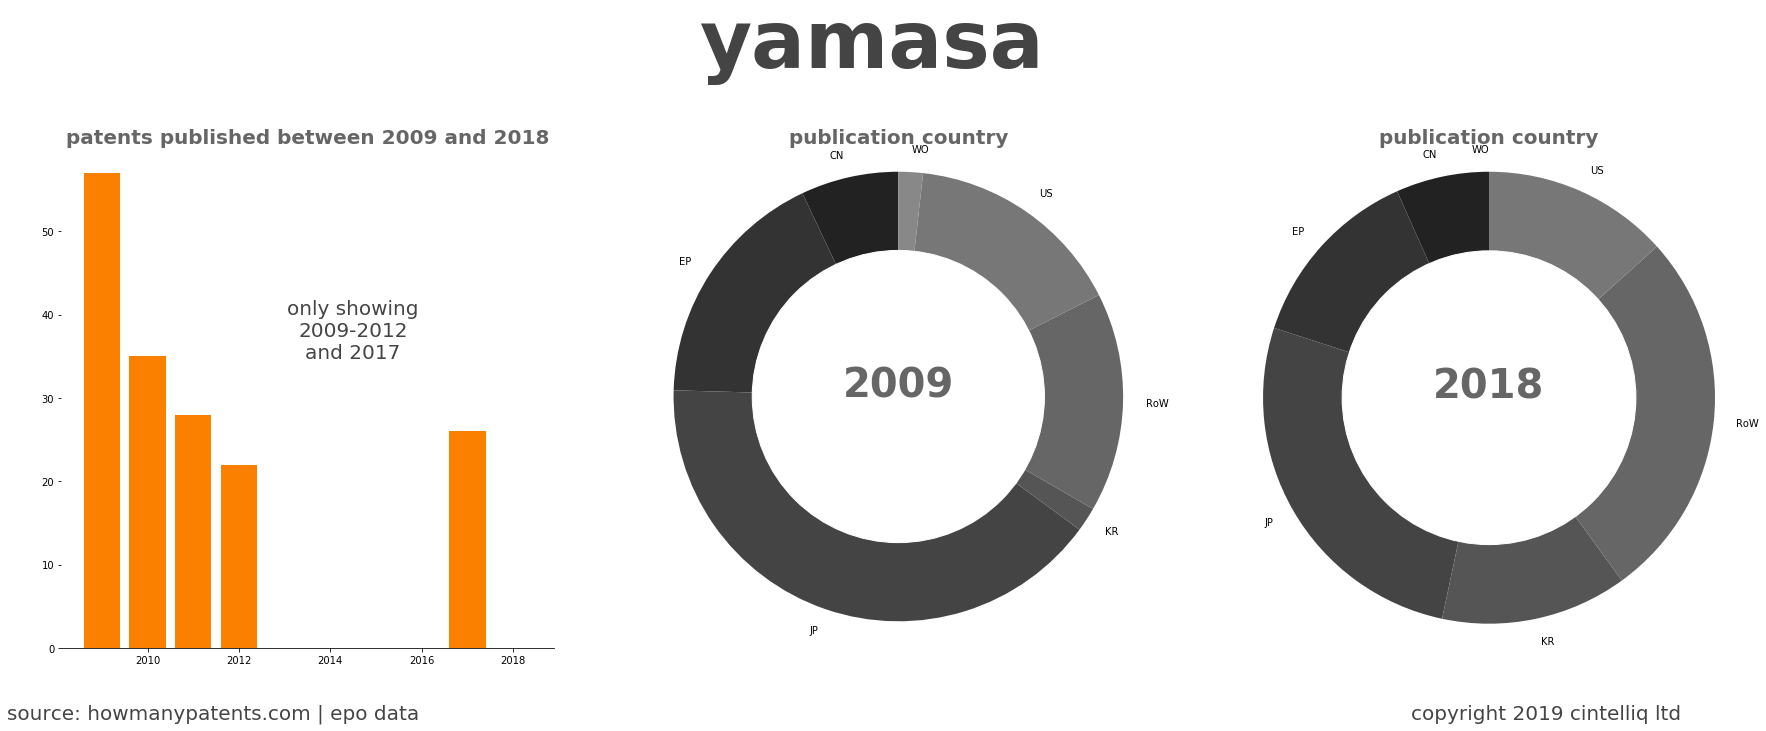 summary of patents for Yamasa